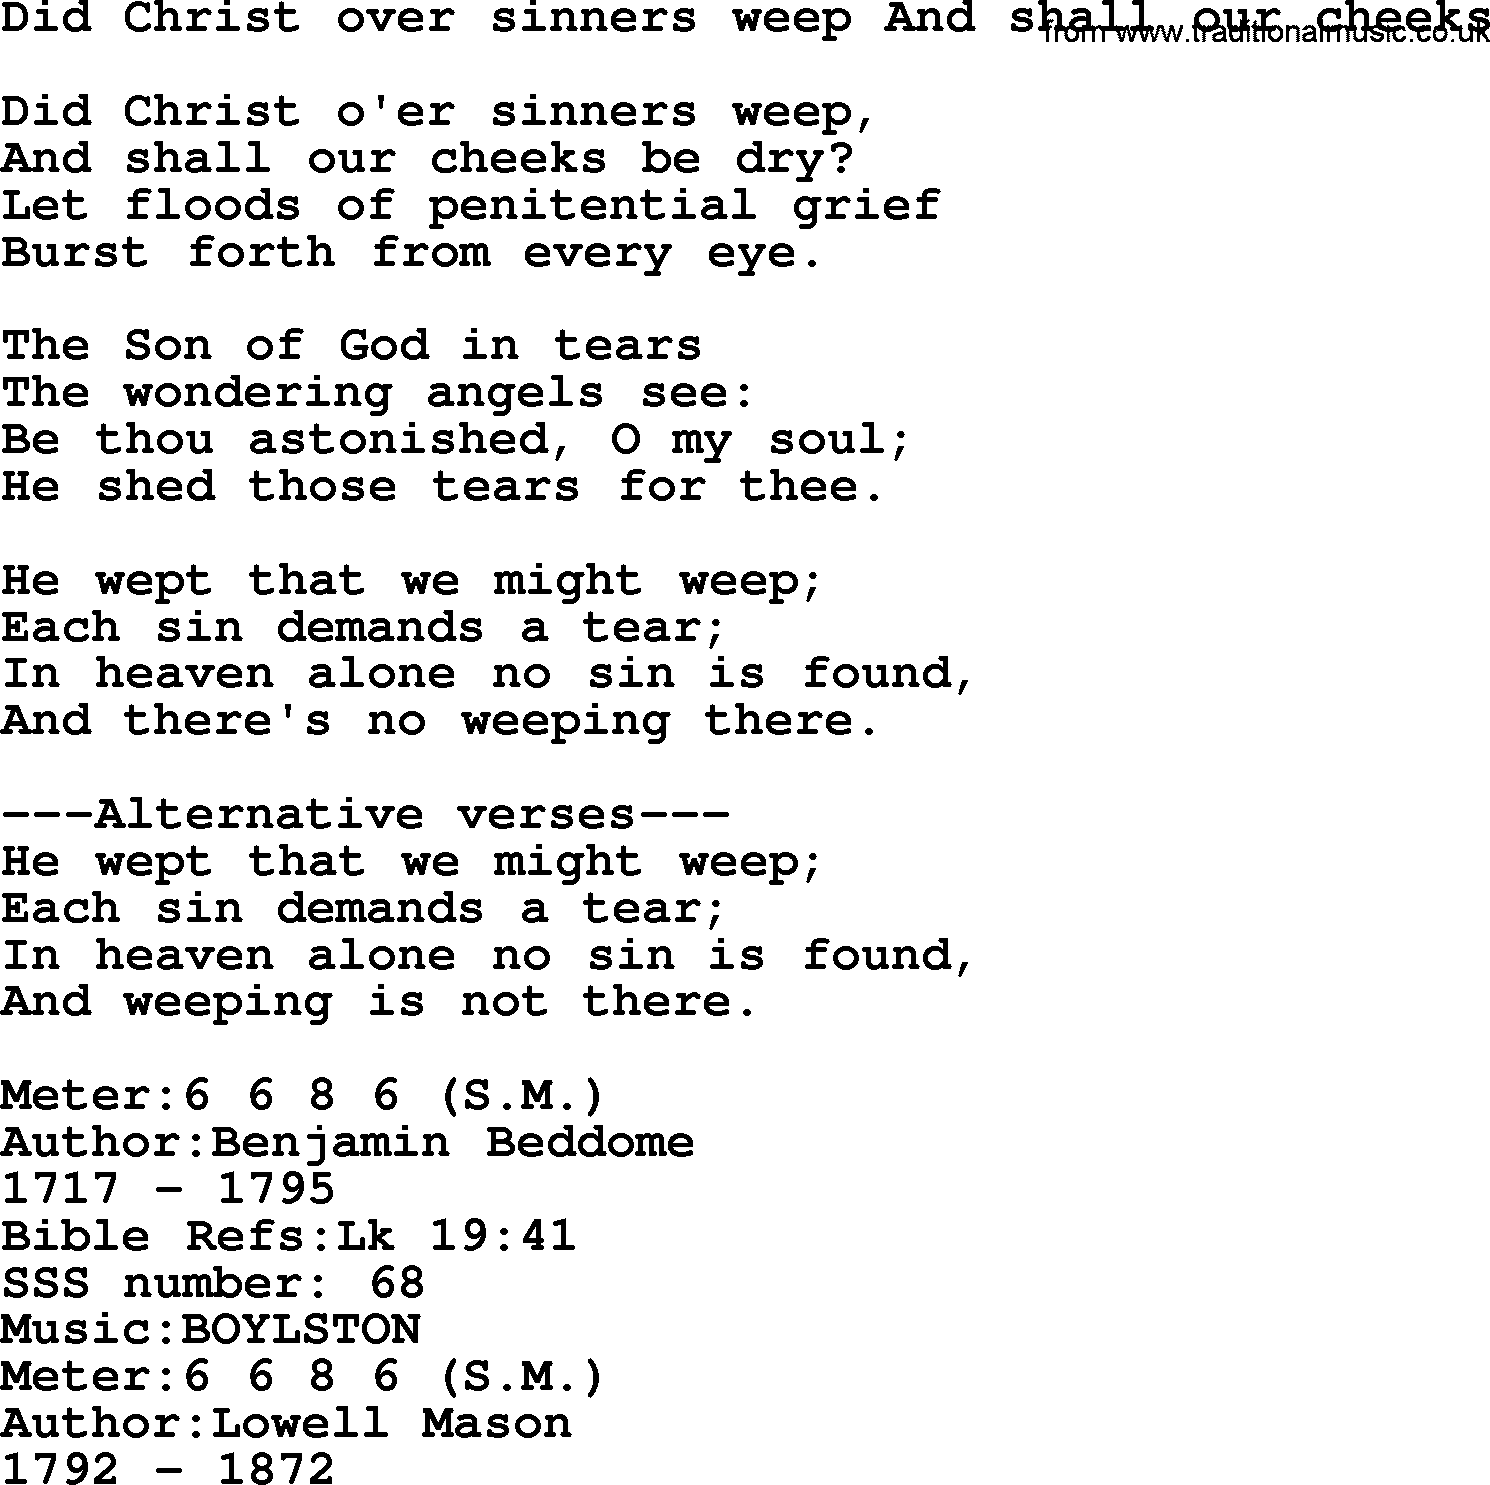 Sacred Songs and Solos complete, 1200 Hymns, title: Did Christ Over Sinners Weep And Shall Our Cheeks, lyrics and PDF